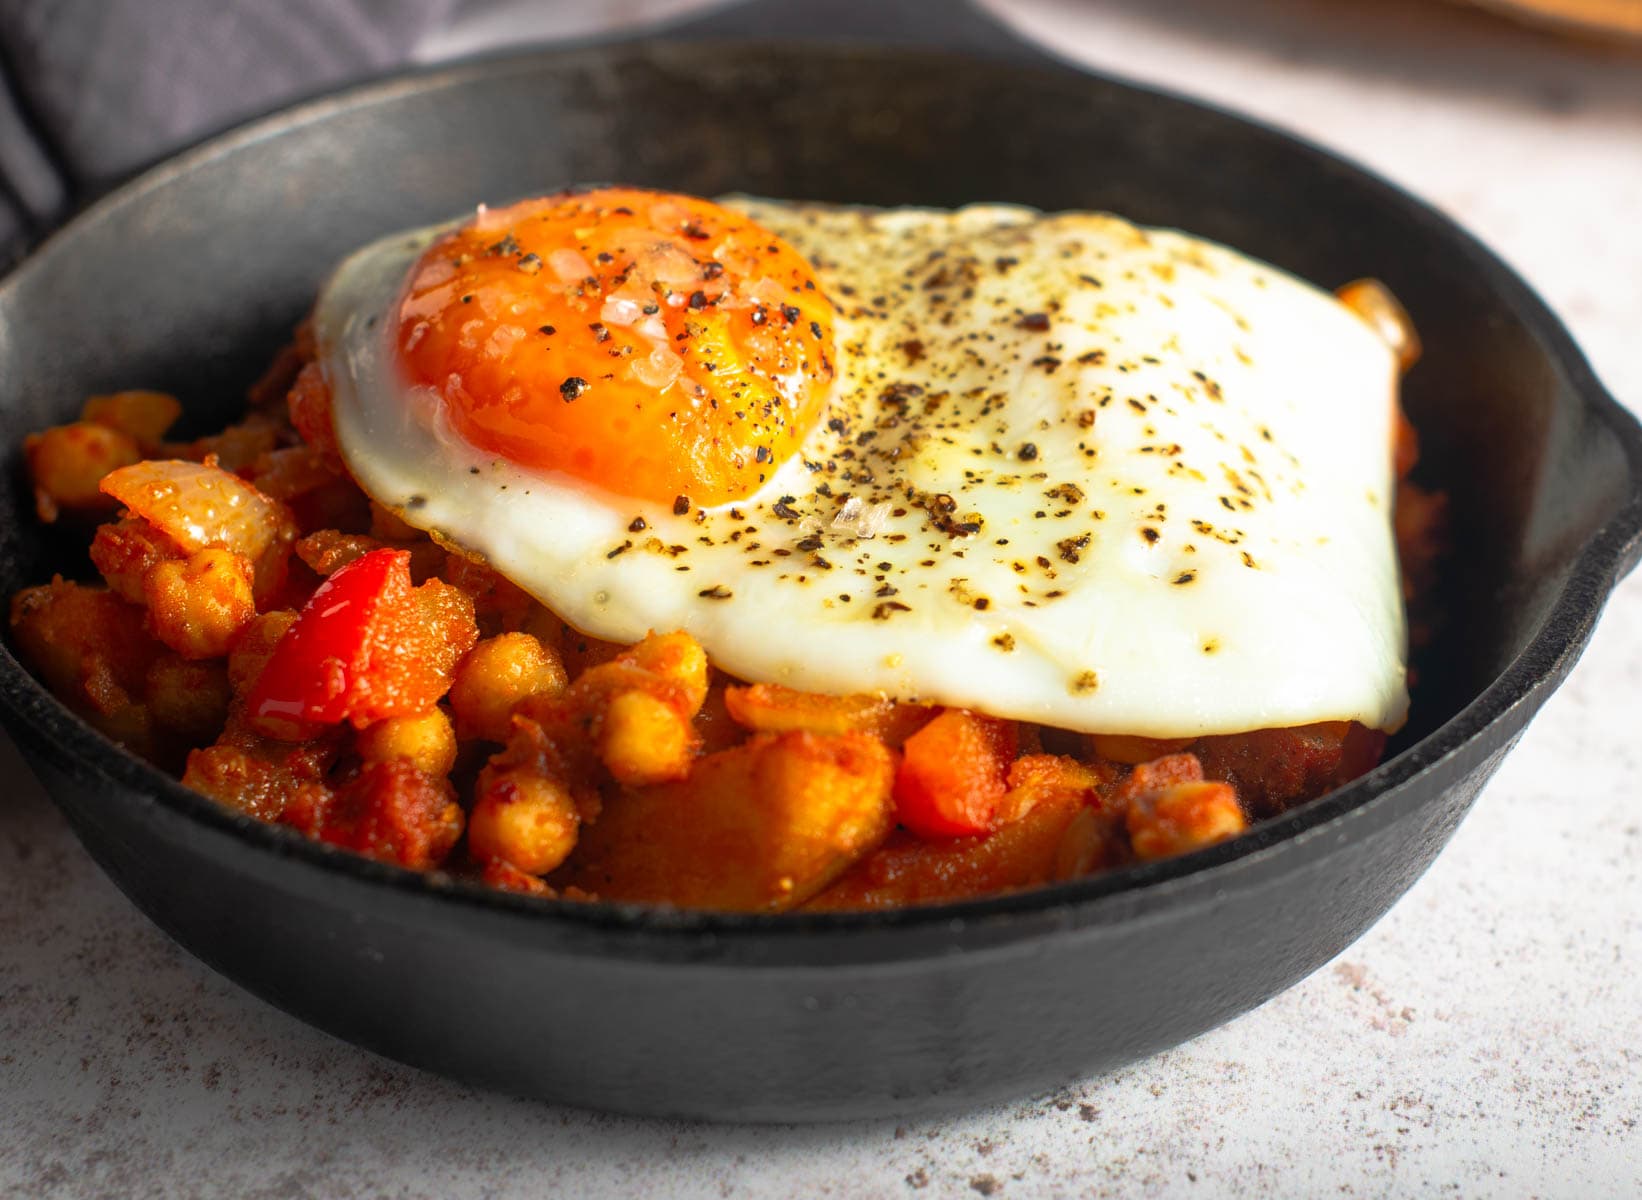 A finished brunch dish using leftover potatoes, chorizo and spices served in a small cast iron fry pan and topped with a runny fried egg.